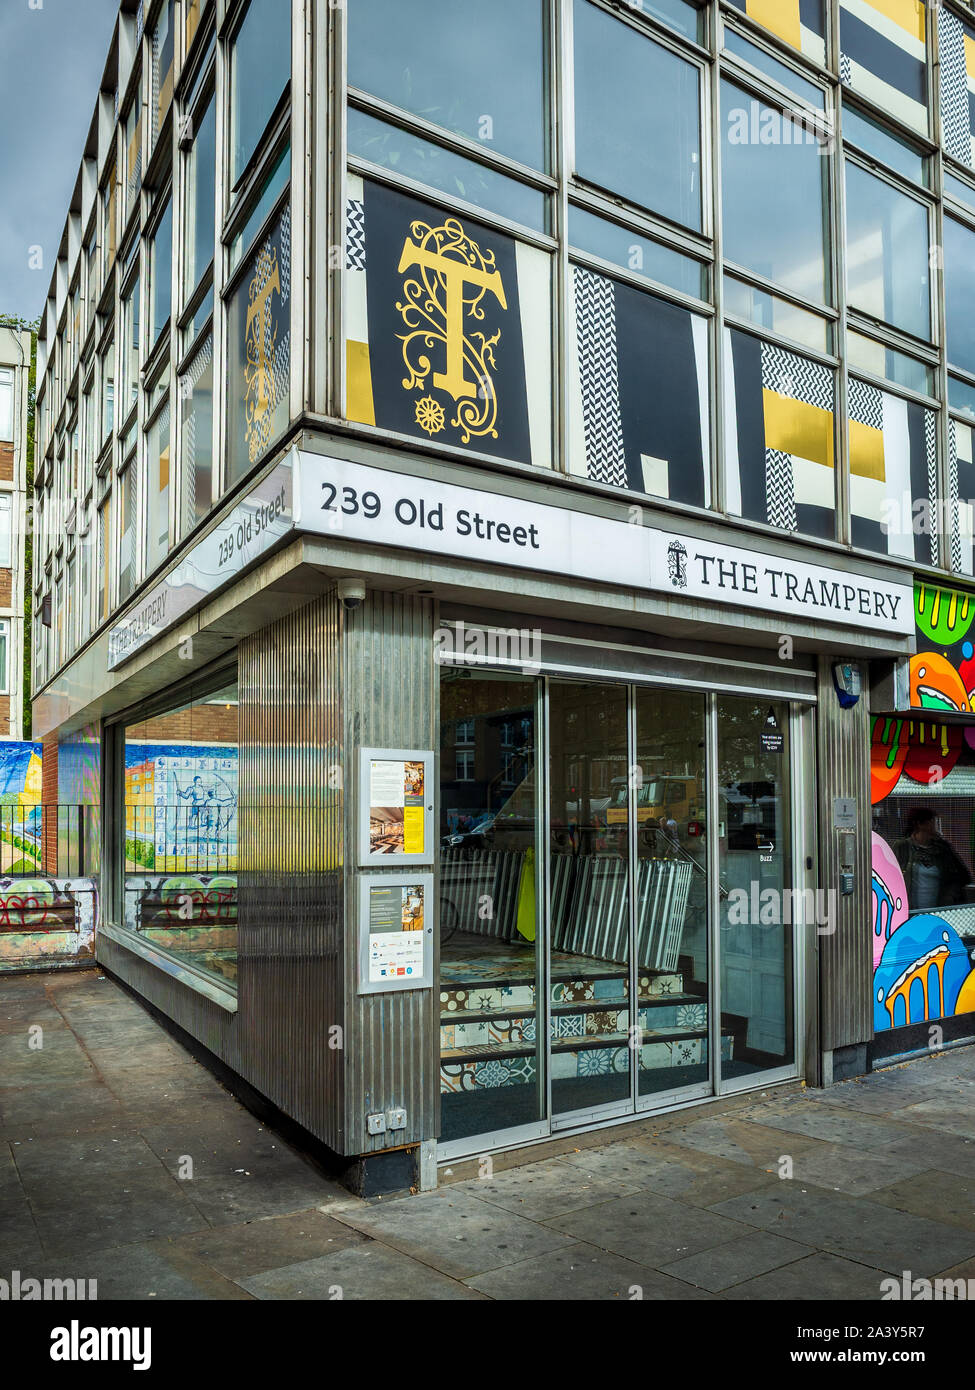 The Trampery Shoreditch / The Trampery Old Street is a social enterprise co-working space in London’s Shoreditch innovation district. Stock Photo